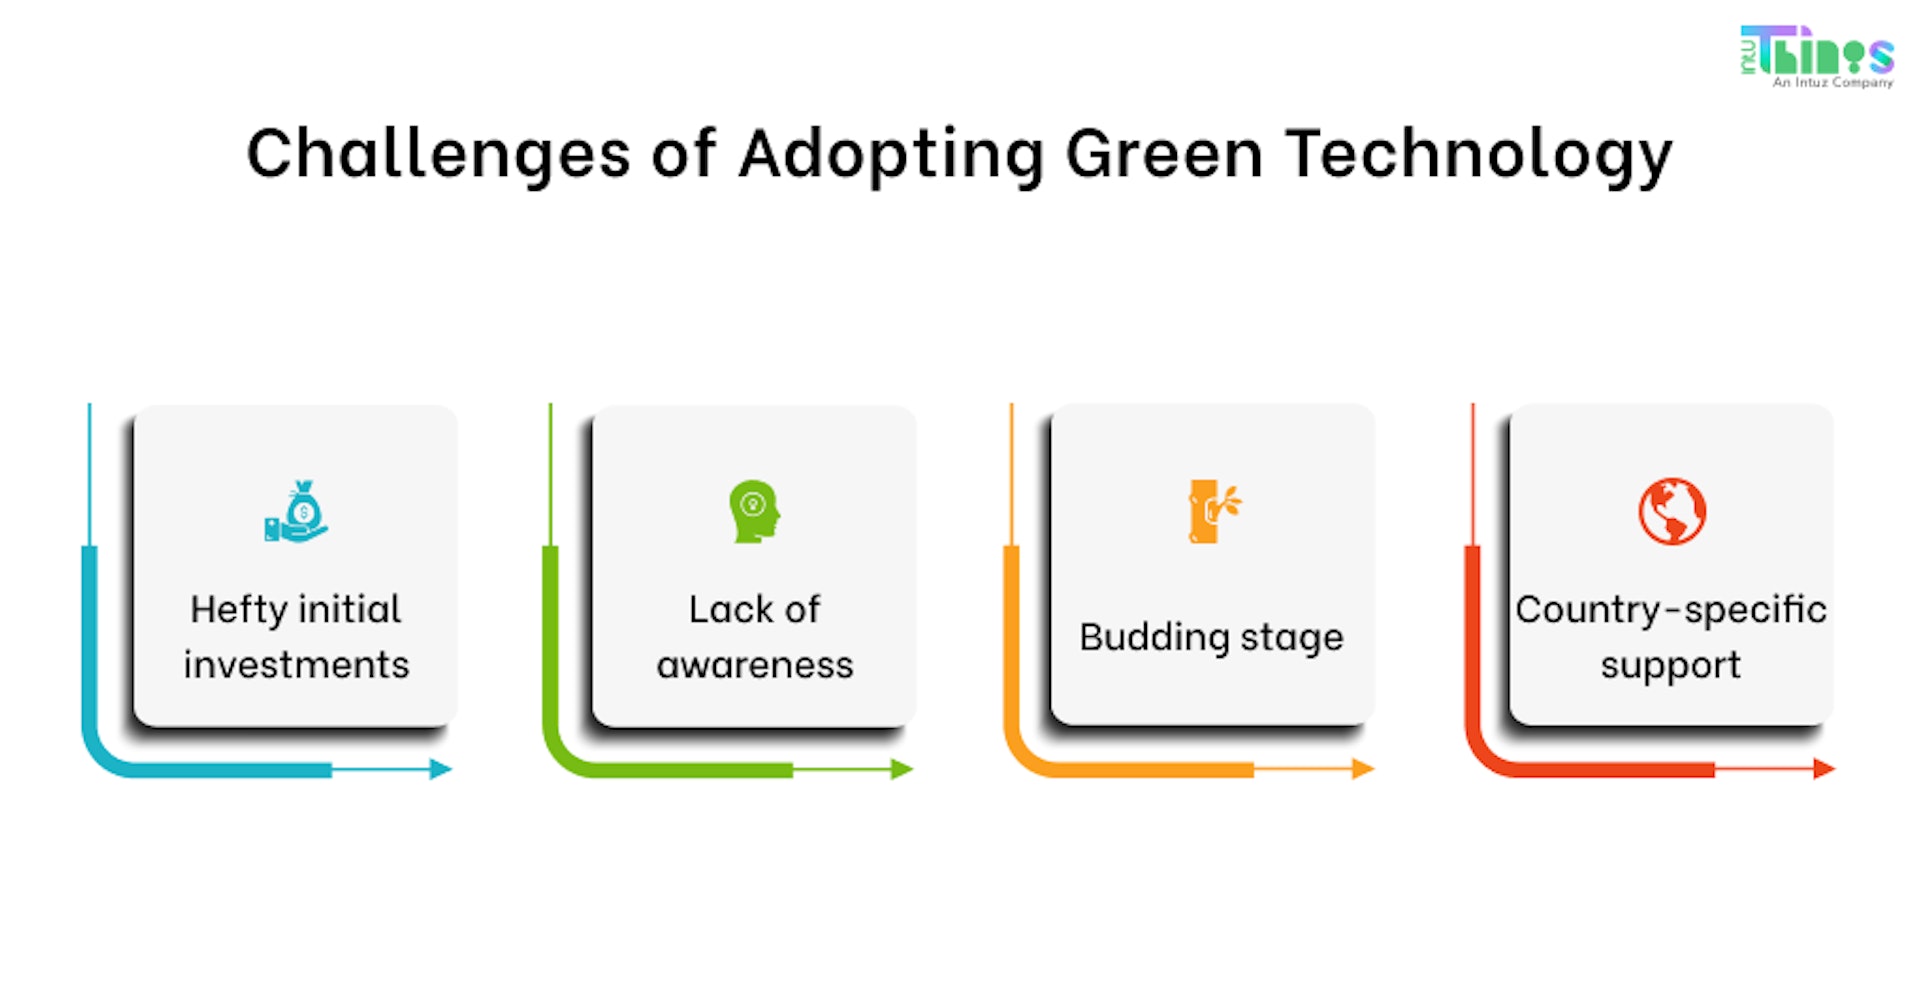 Challenges of adopting green technology